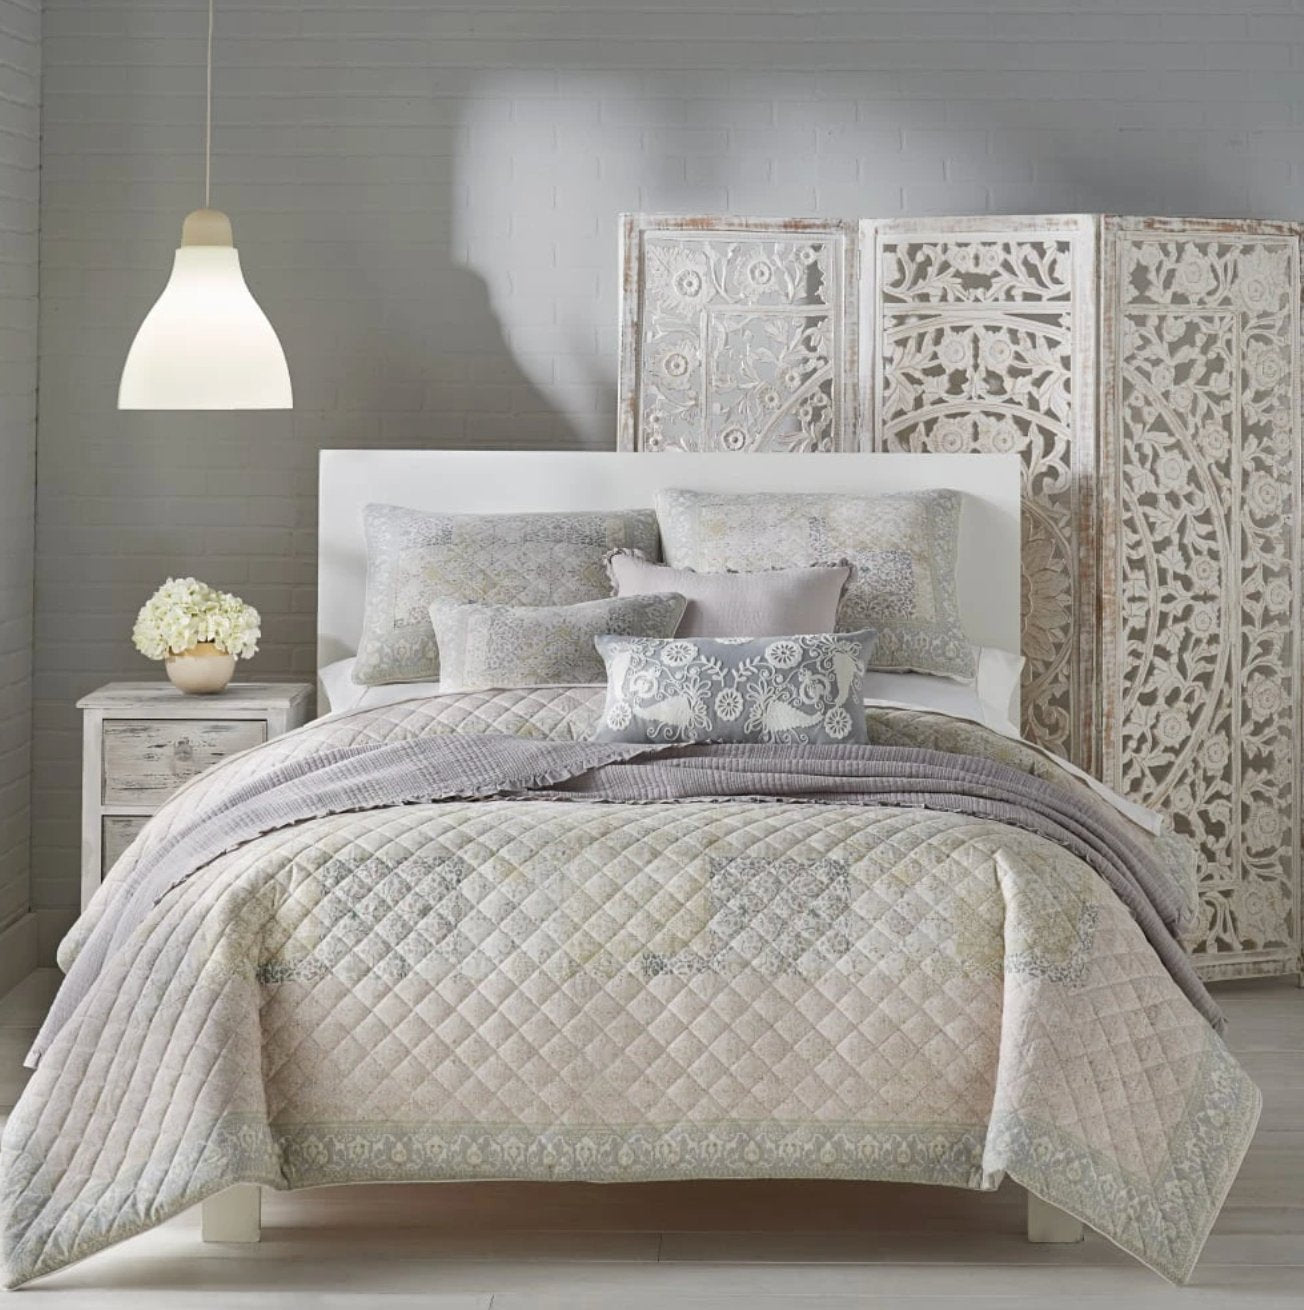 LAYER YOUR BED - Pier 1